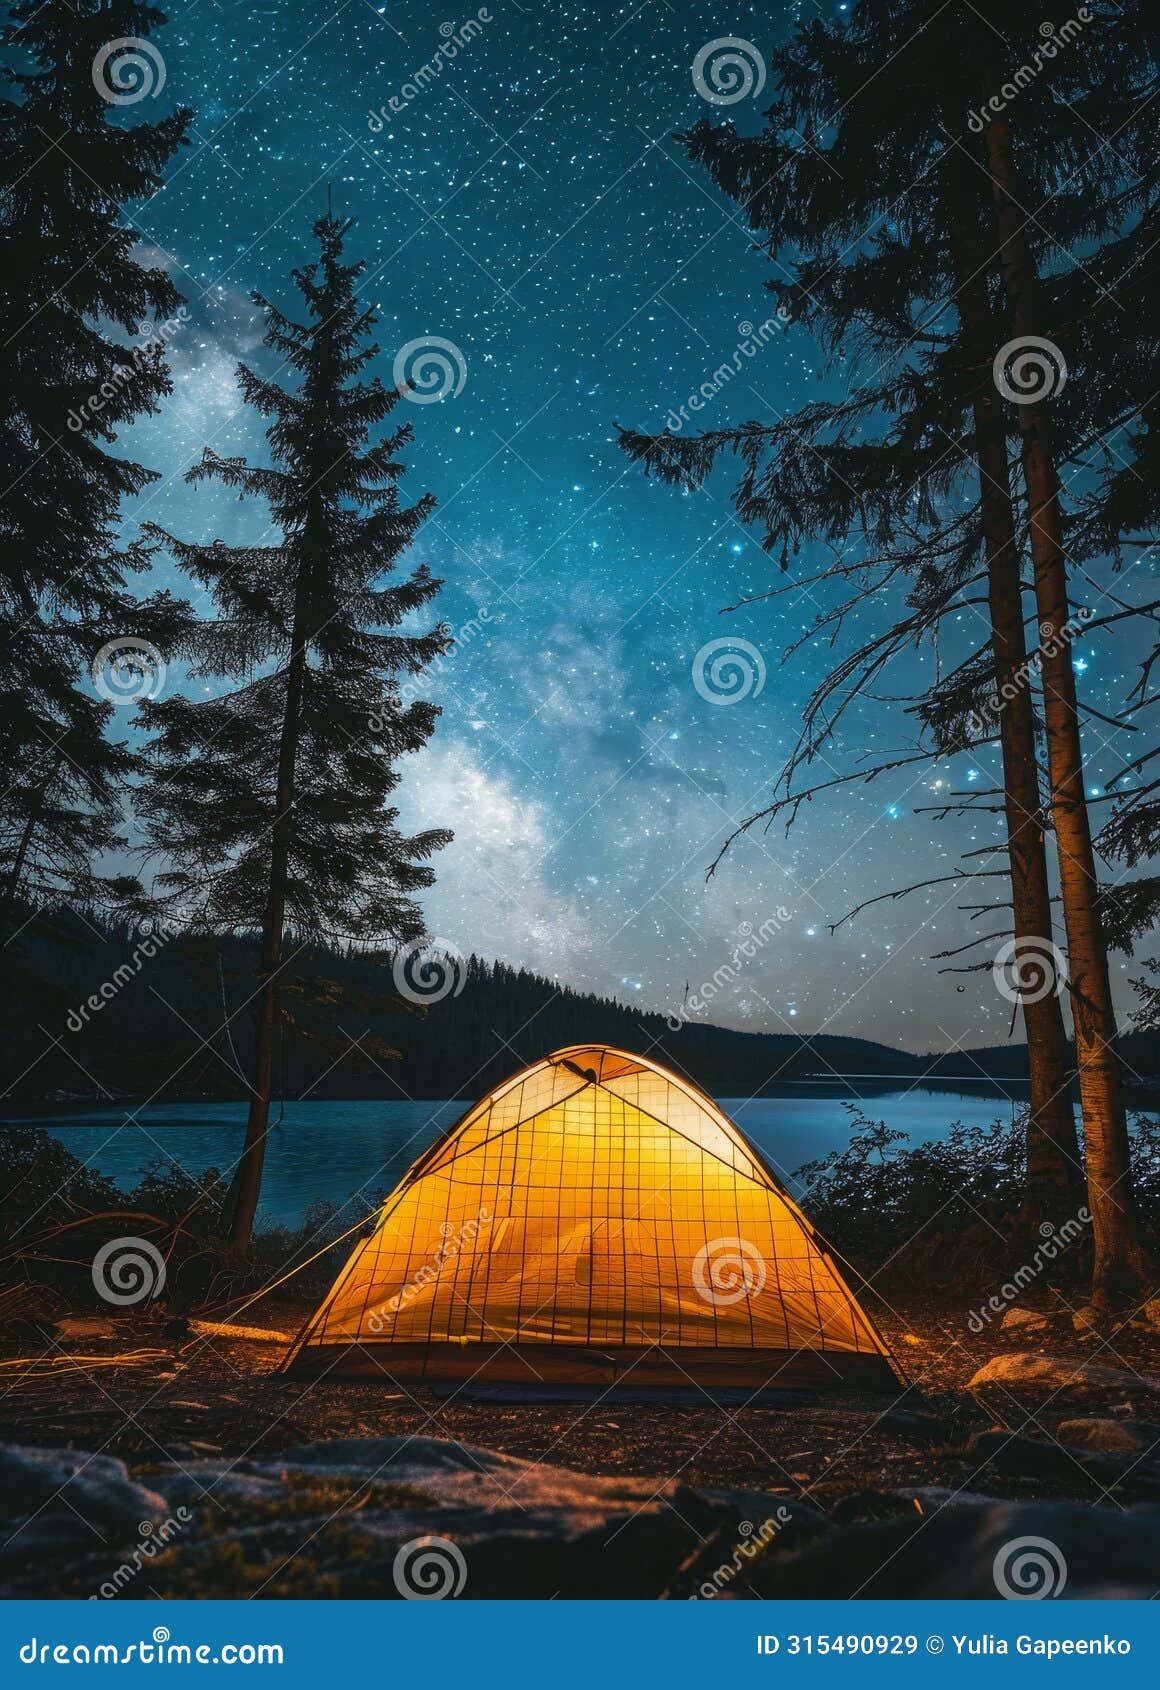 tent pitched on lake shore under night sky